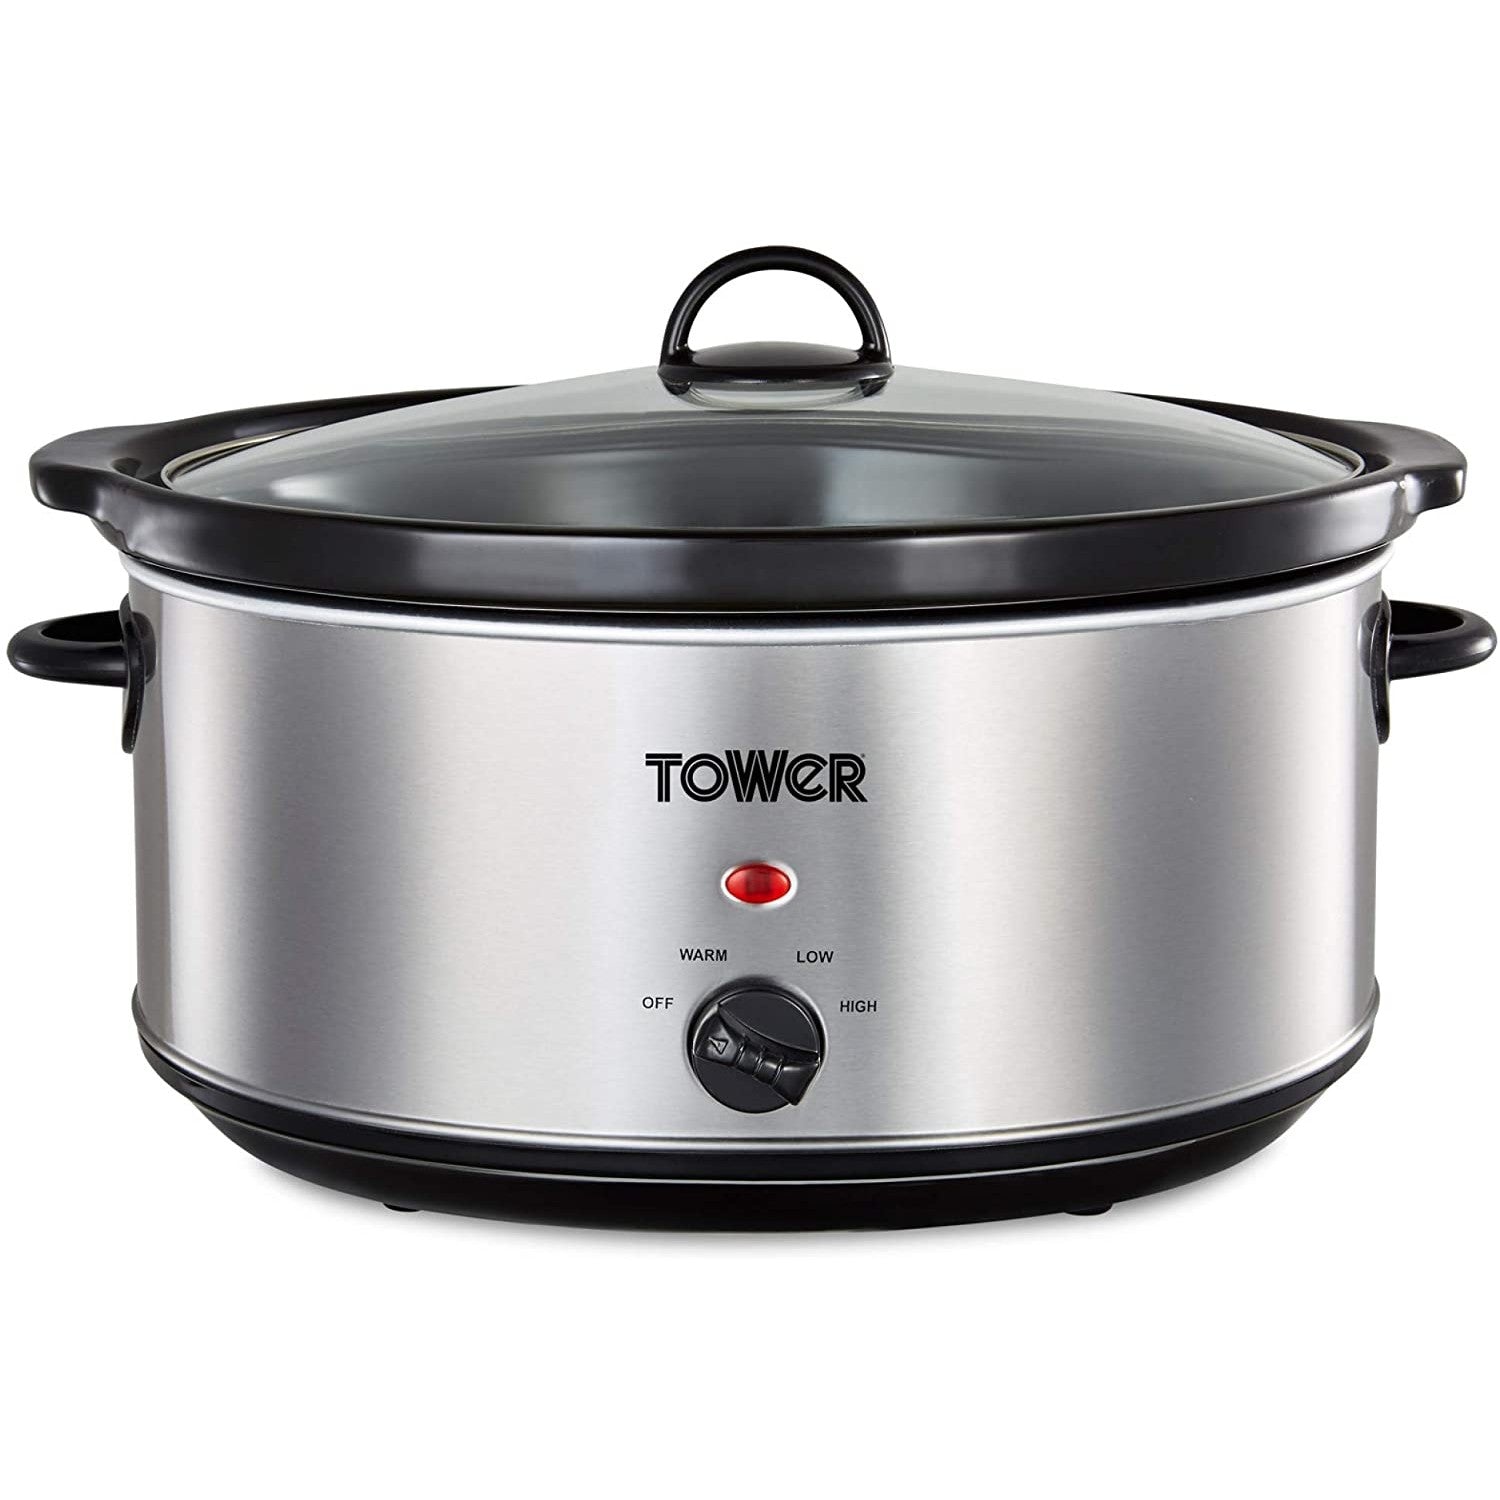 Tower 6.5L Stainless Steel Slow Cooker